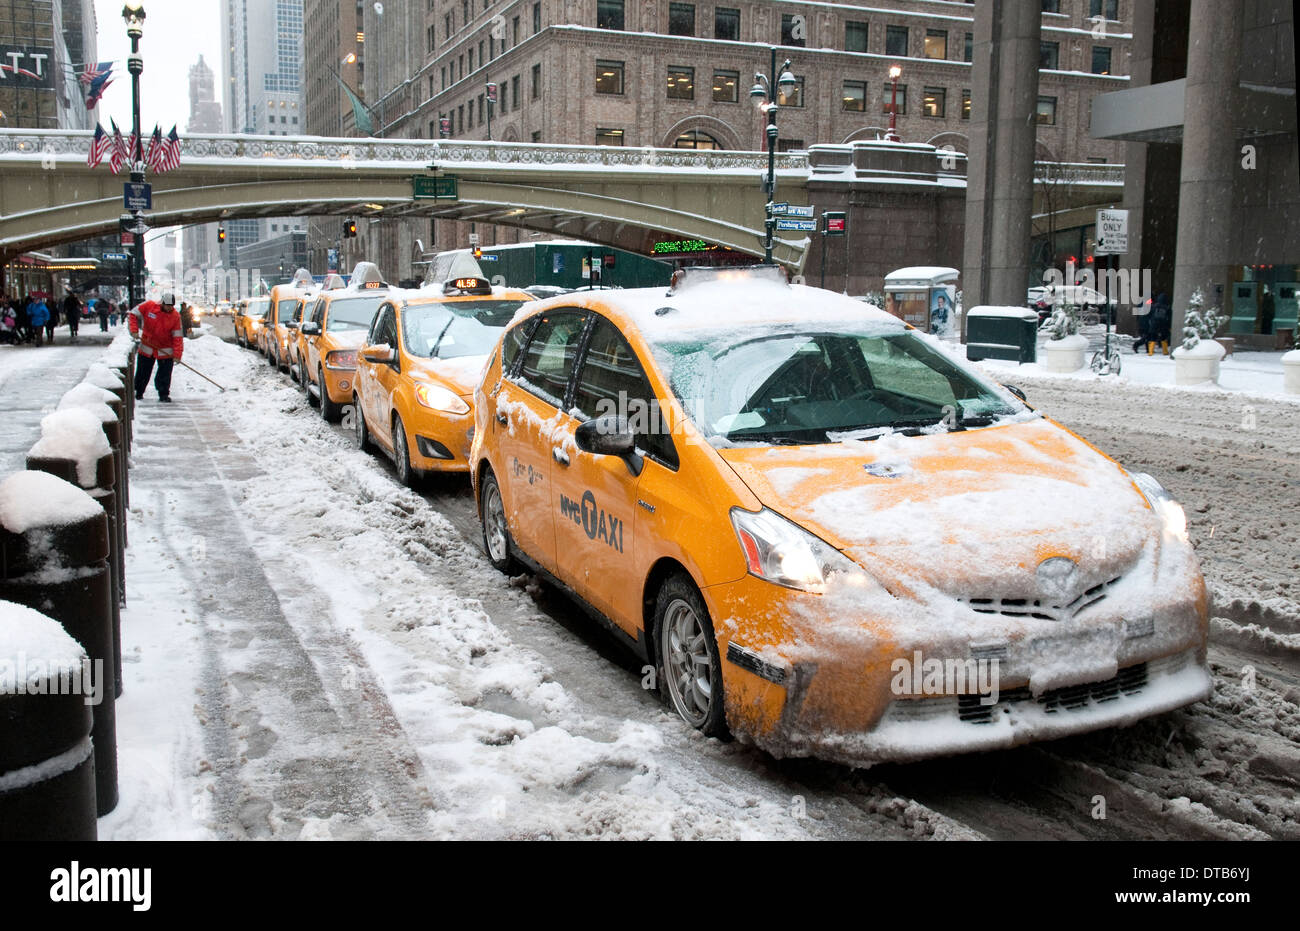 Taxis lined up outside Grand Central Station in New York City in the snow Stock Photo